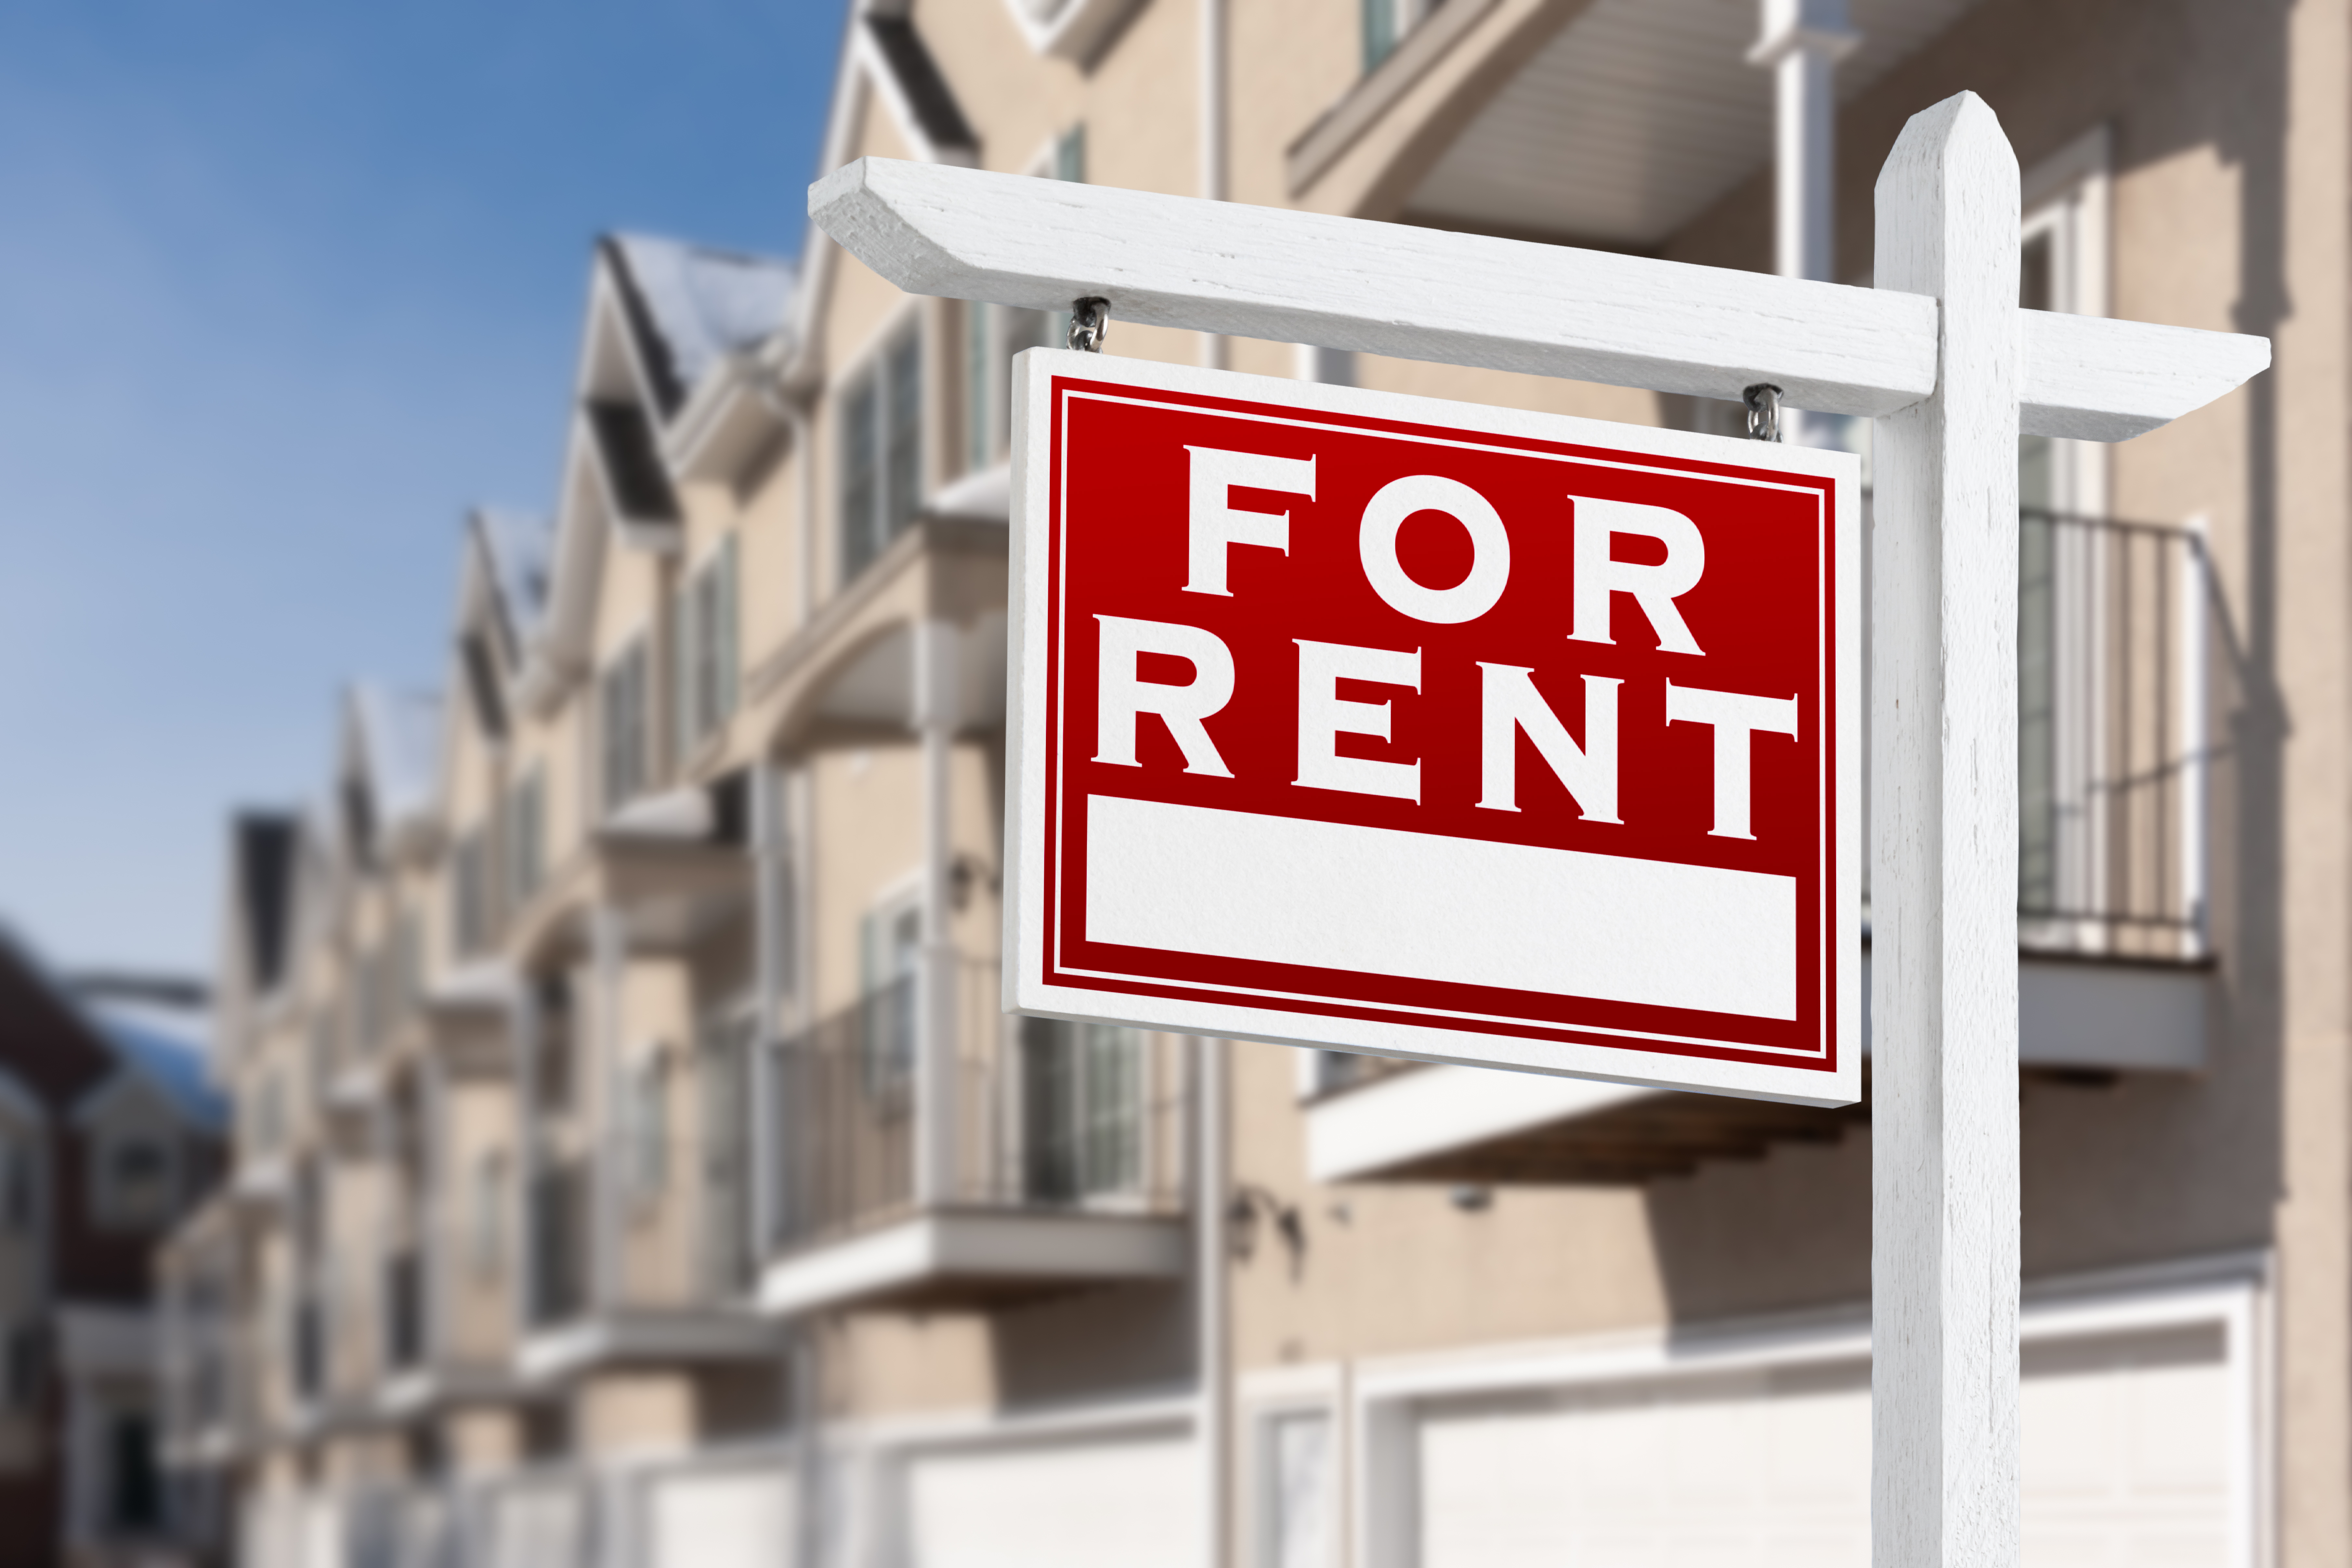 The pitfalls of letting an algorithm set the rent - Marketplace